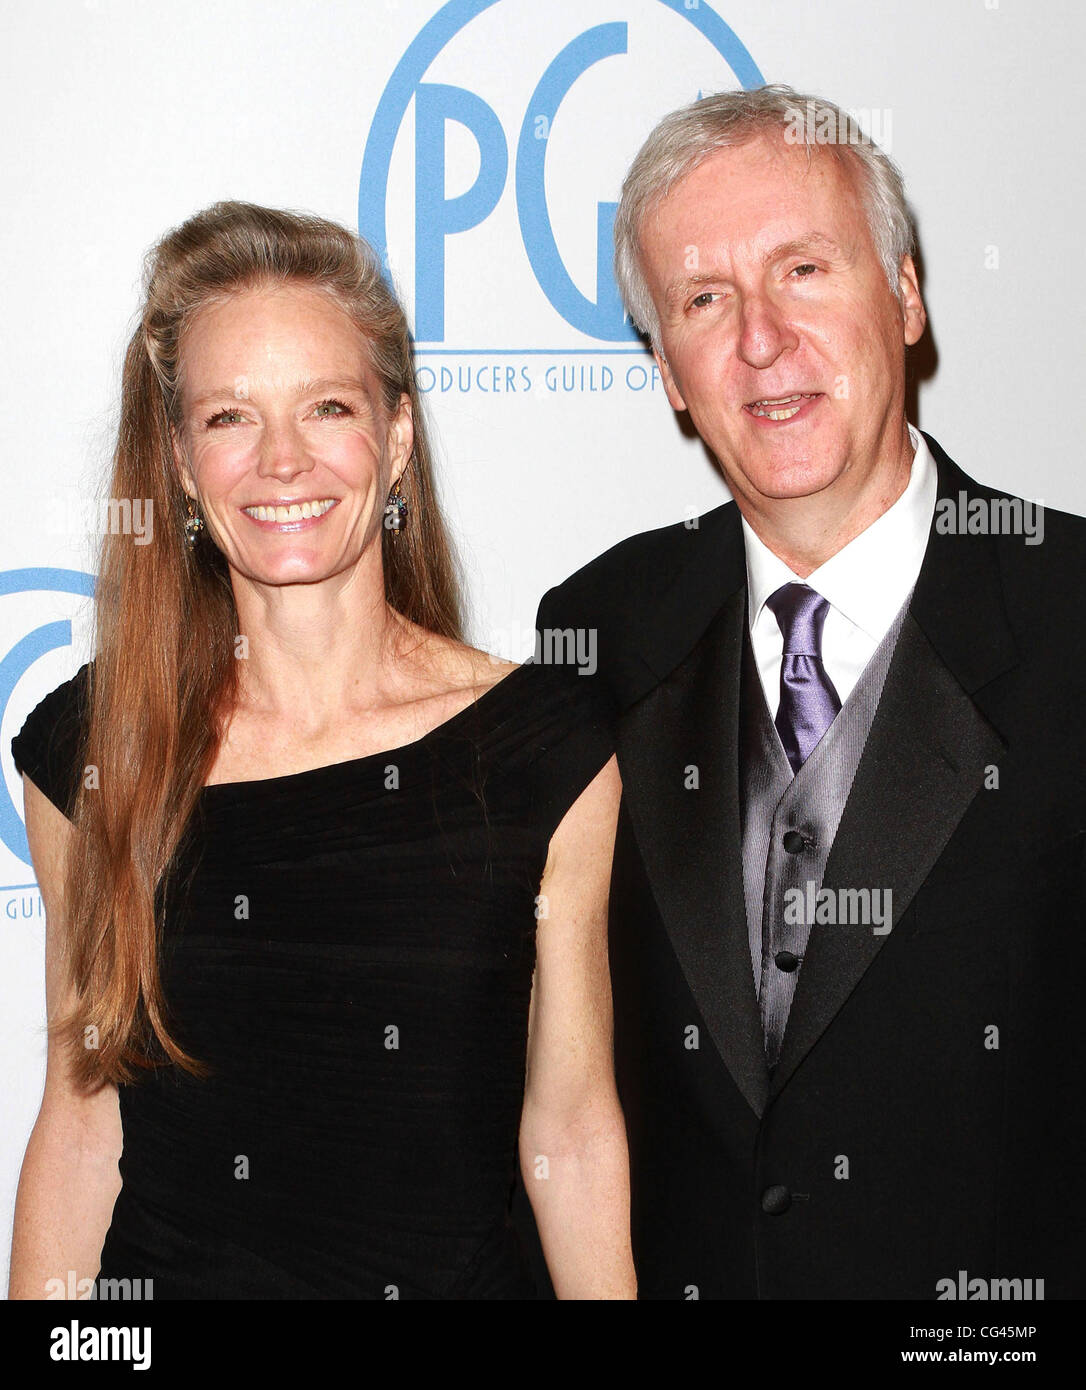 Suzy Amis and James Cameron  The 22nd Annual Producers Guild (PGA) Awards held at The Beverly Hilton Hotel - Arrivals Los Angeles, California - 22.01.11 Stock Photo